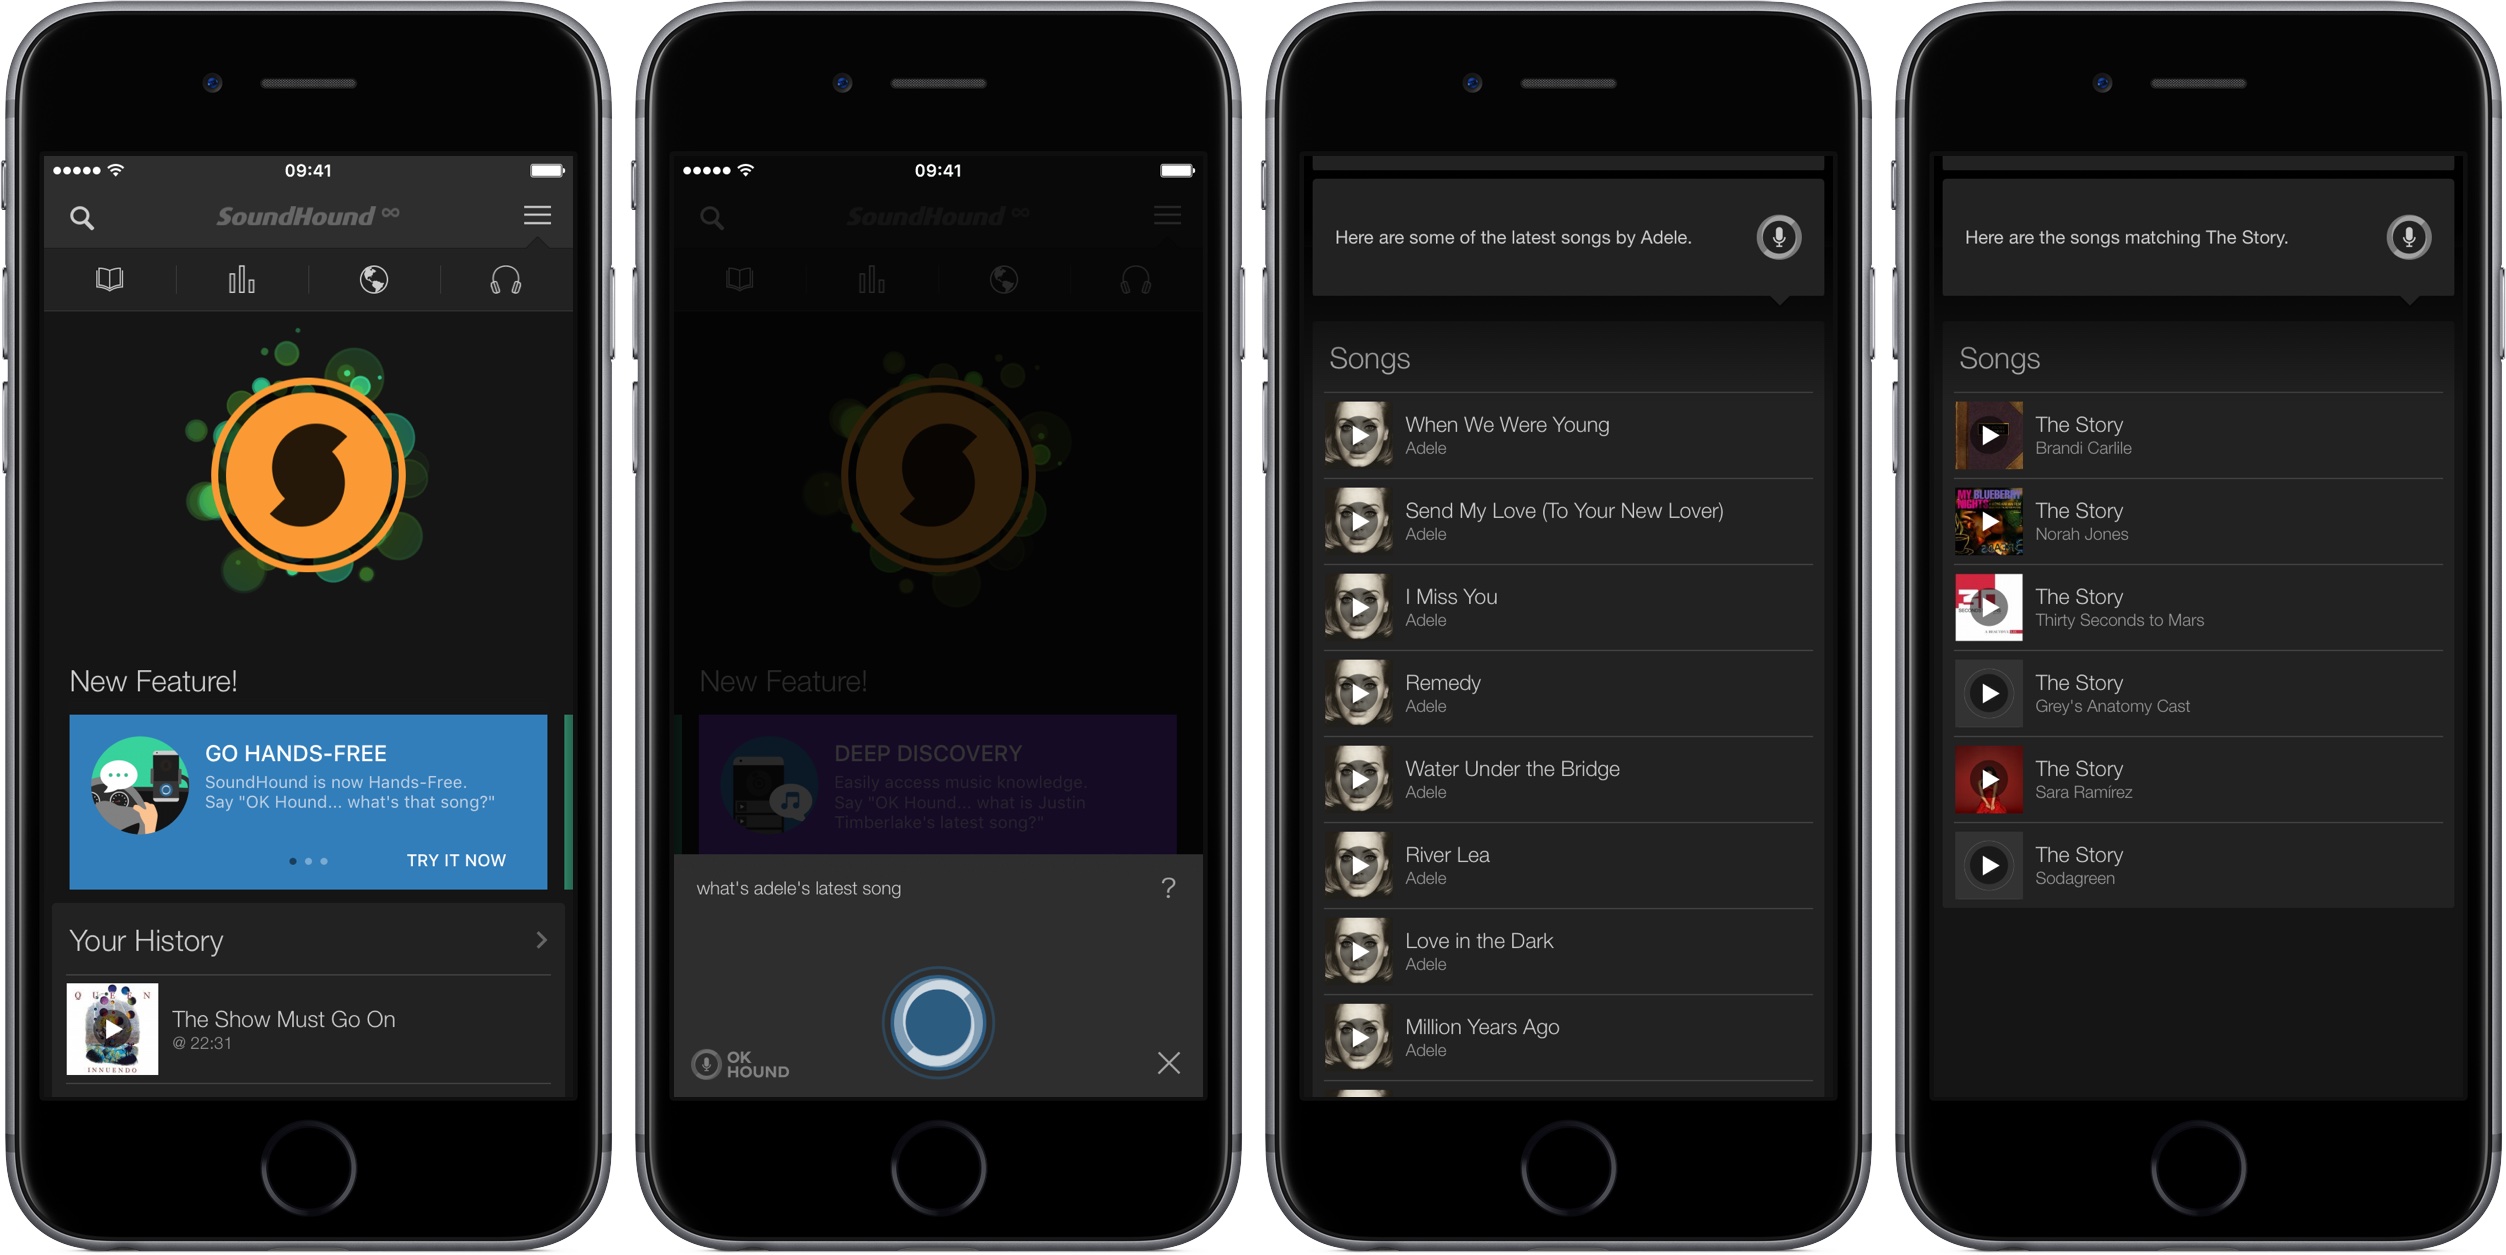 soundhound-7.1-for-ios-iphone